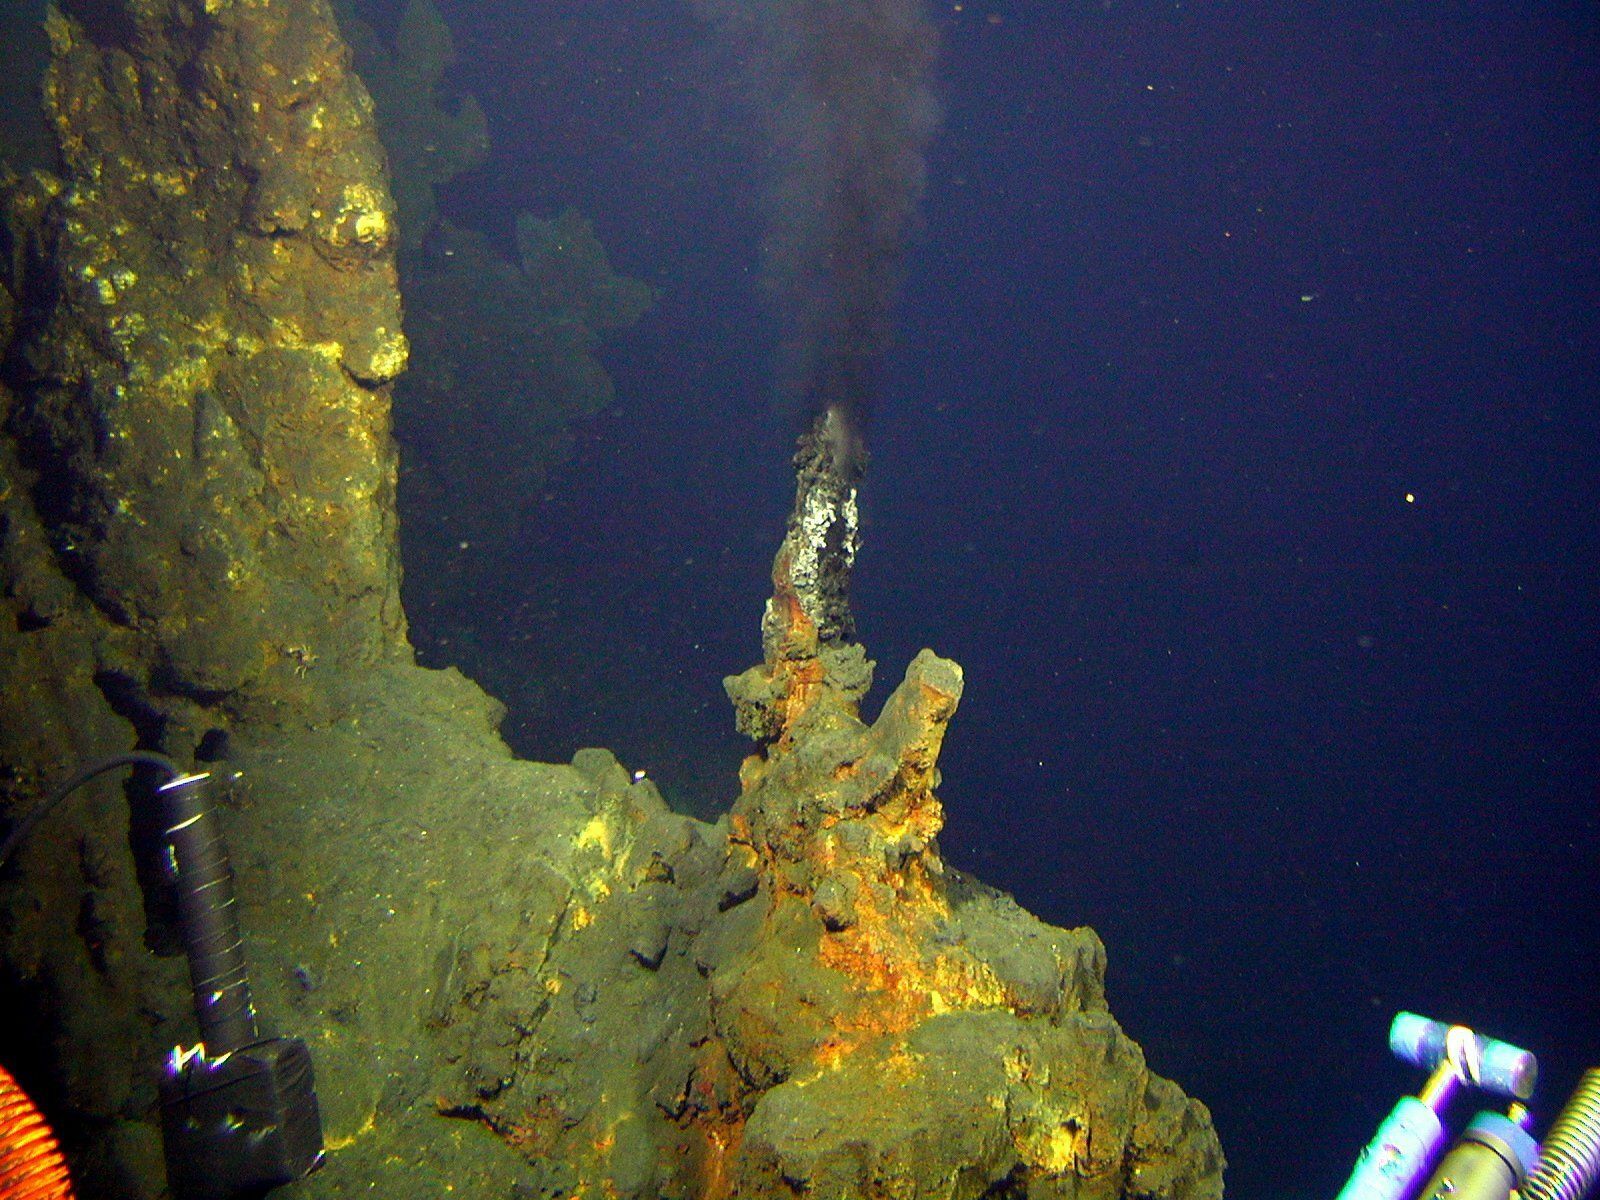 Scientists have discovered unknown life forms that live in volcanoes